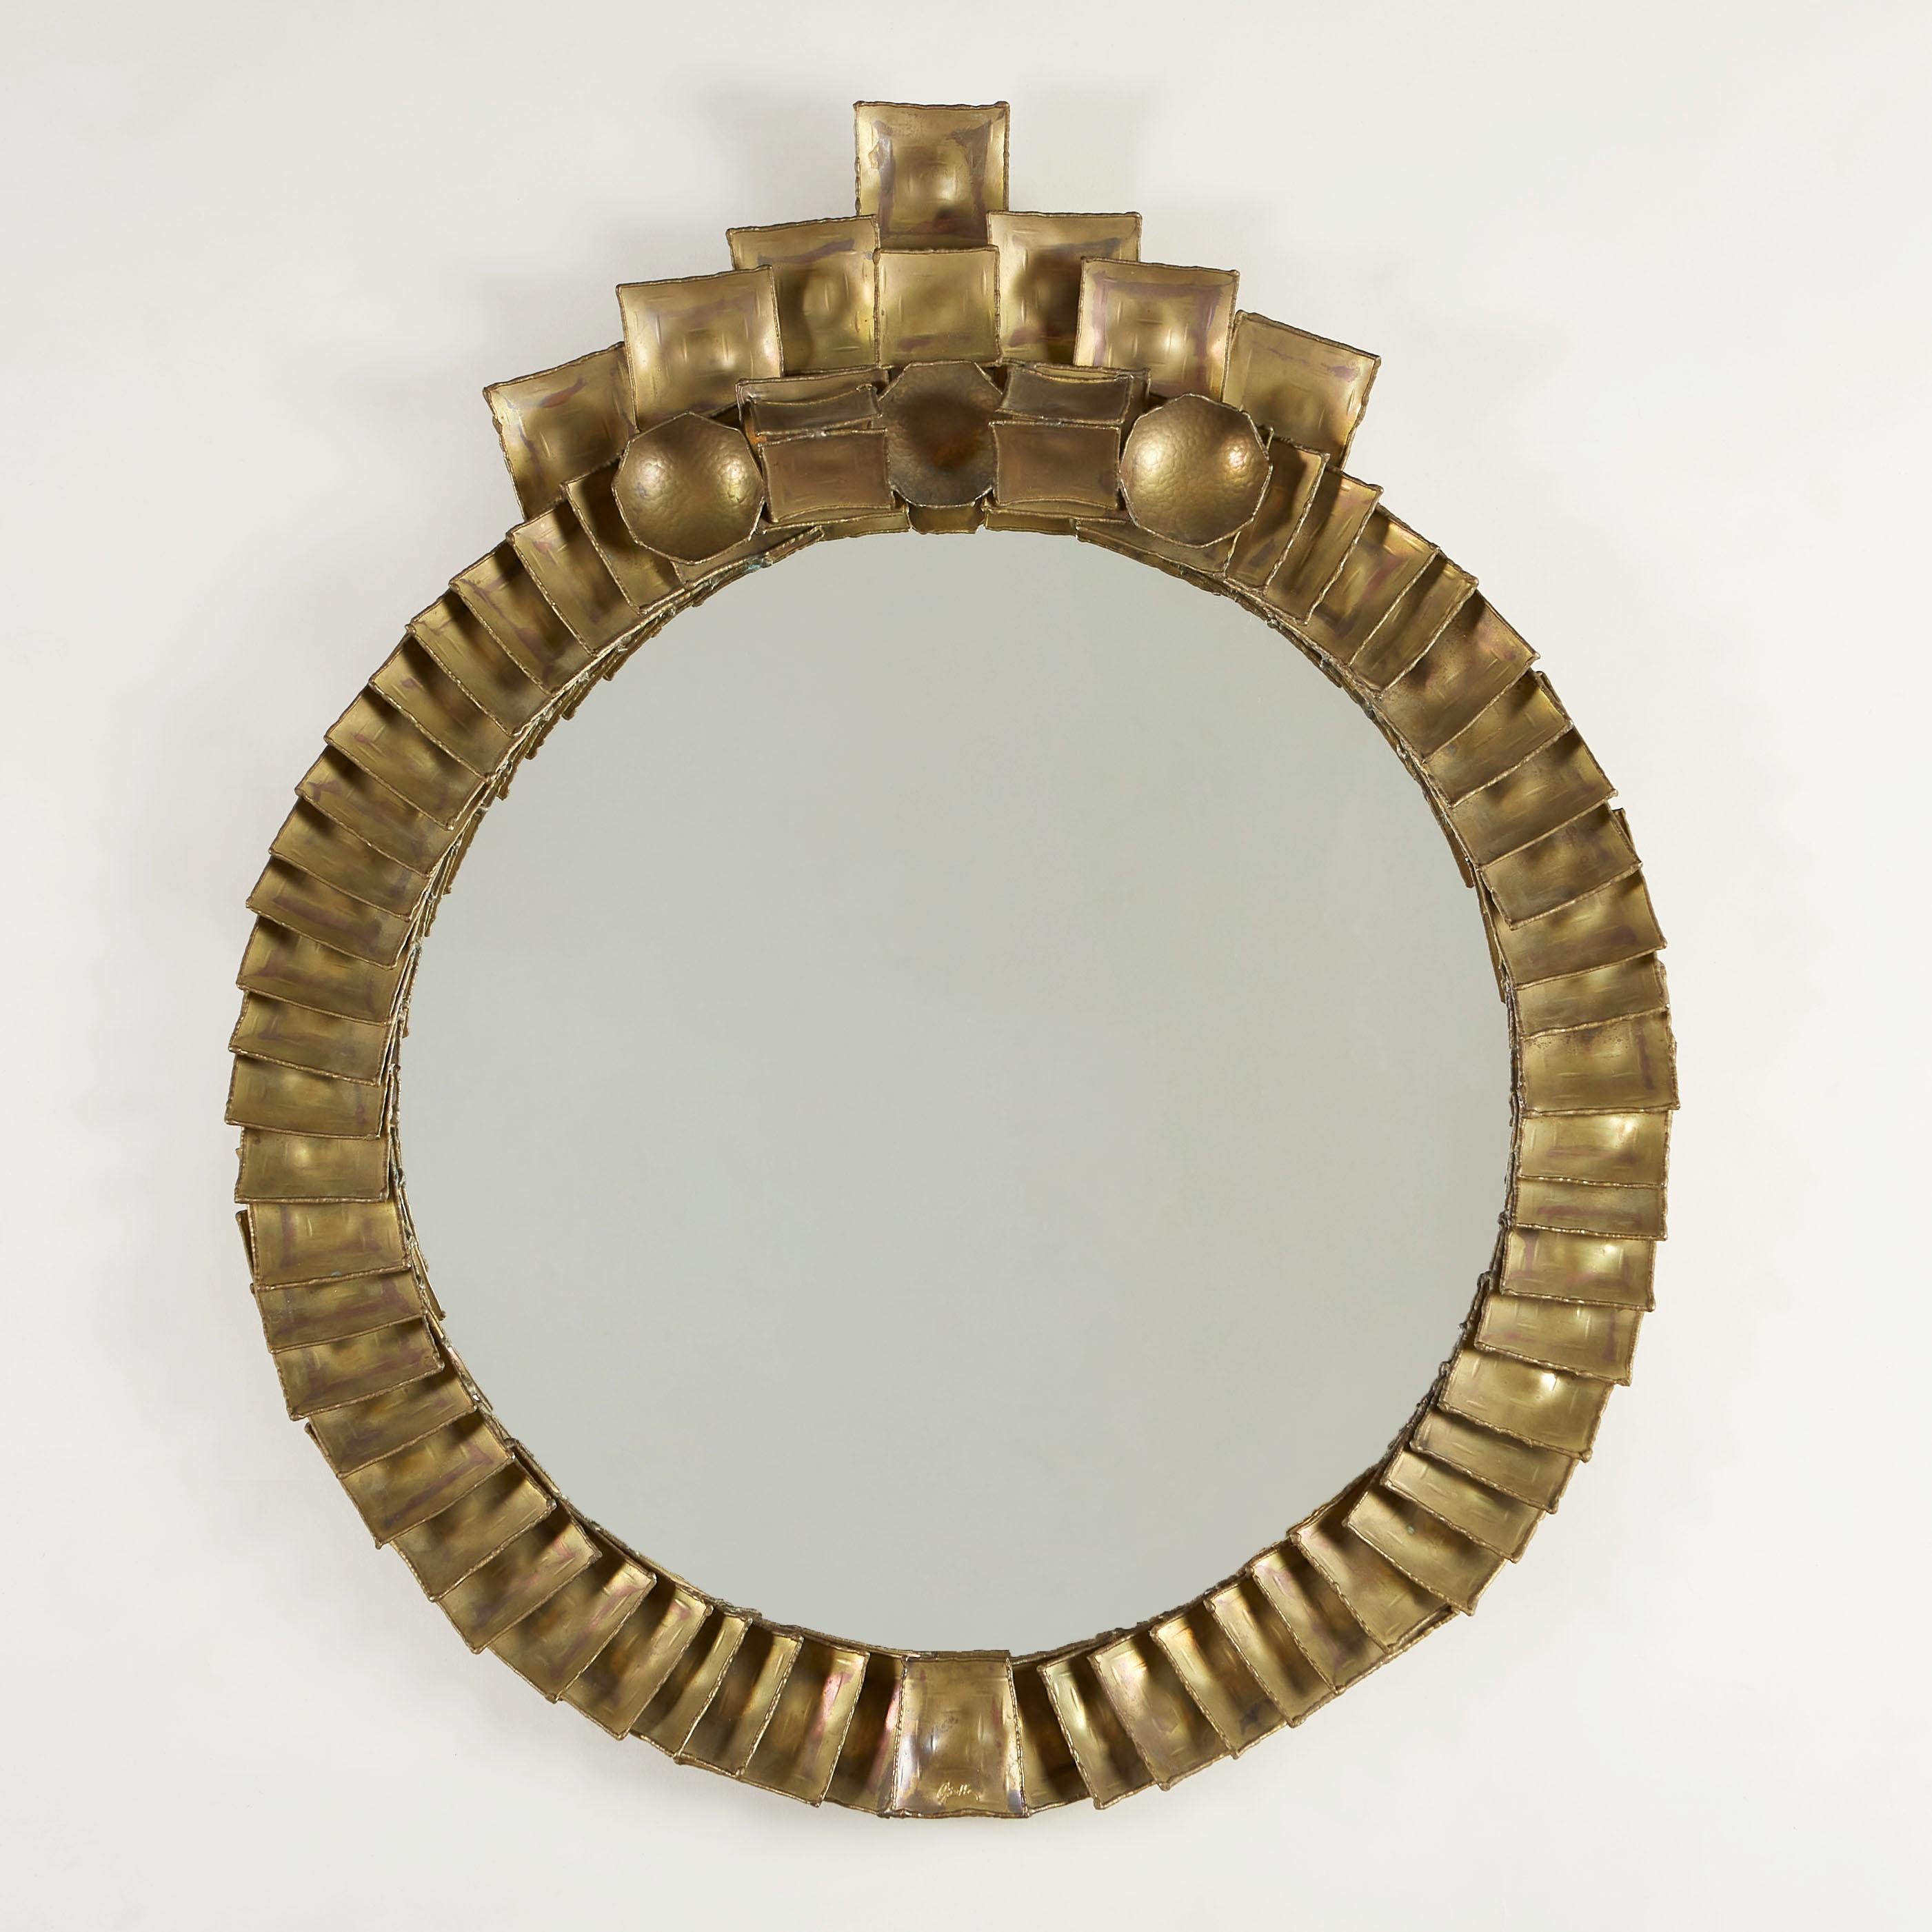 Striking and Imposing brass mirror designed from overlapping shaped burnished brass pieces. Signed Giertta.

Claës Giertta (1926-2007) was an influential silversmith, sculptor and designer in Sweden highly regarded for his experimentation with